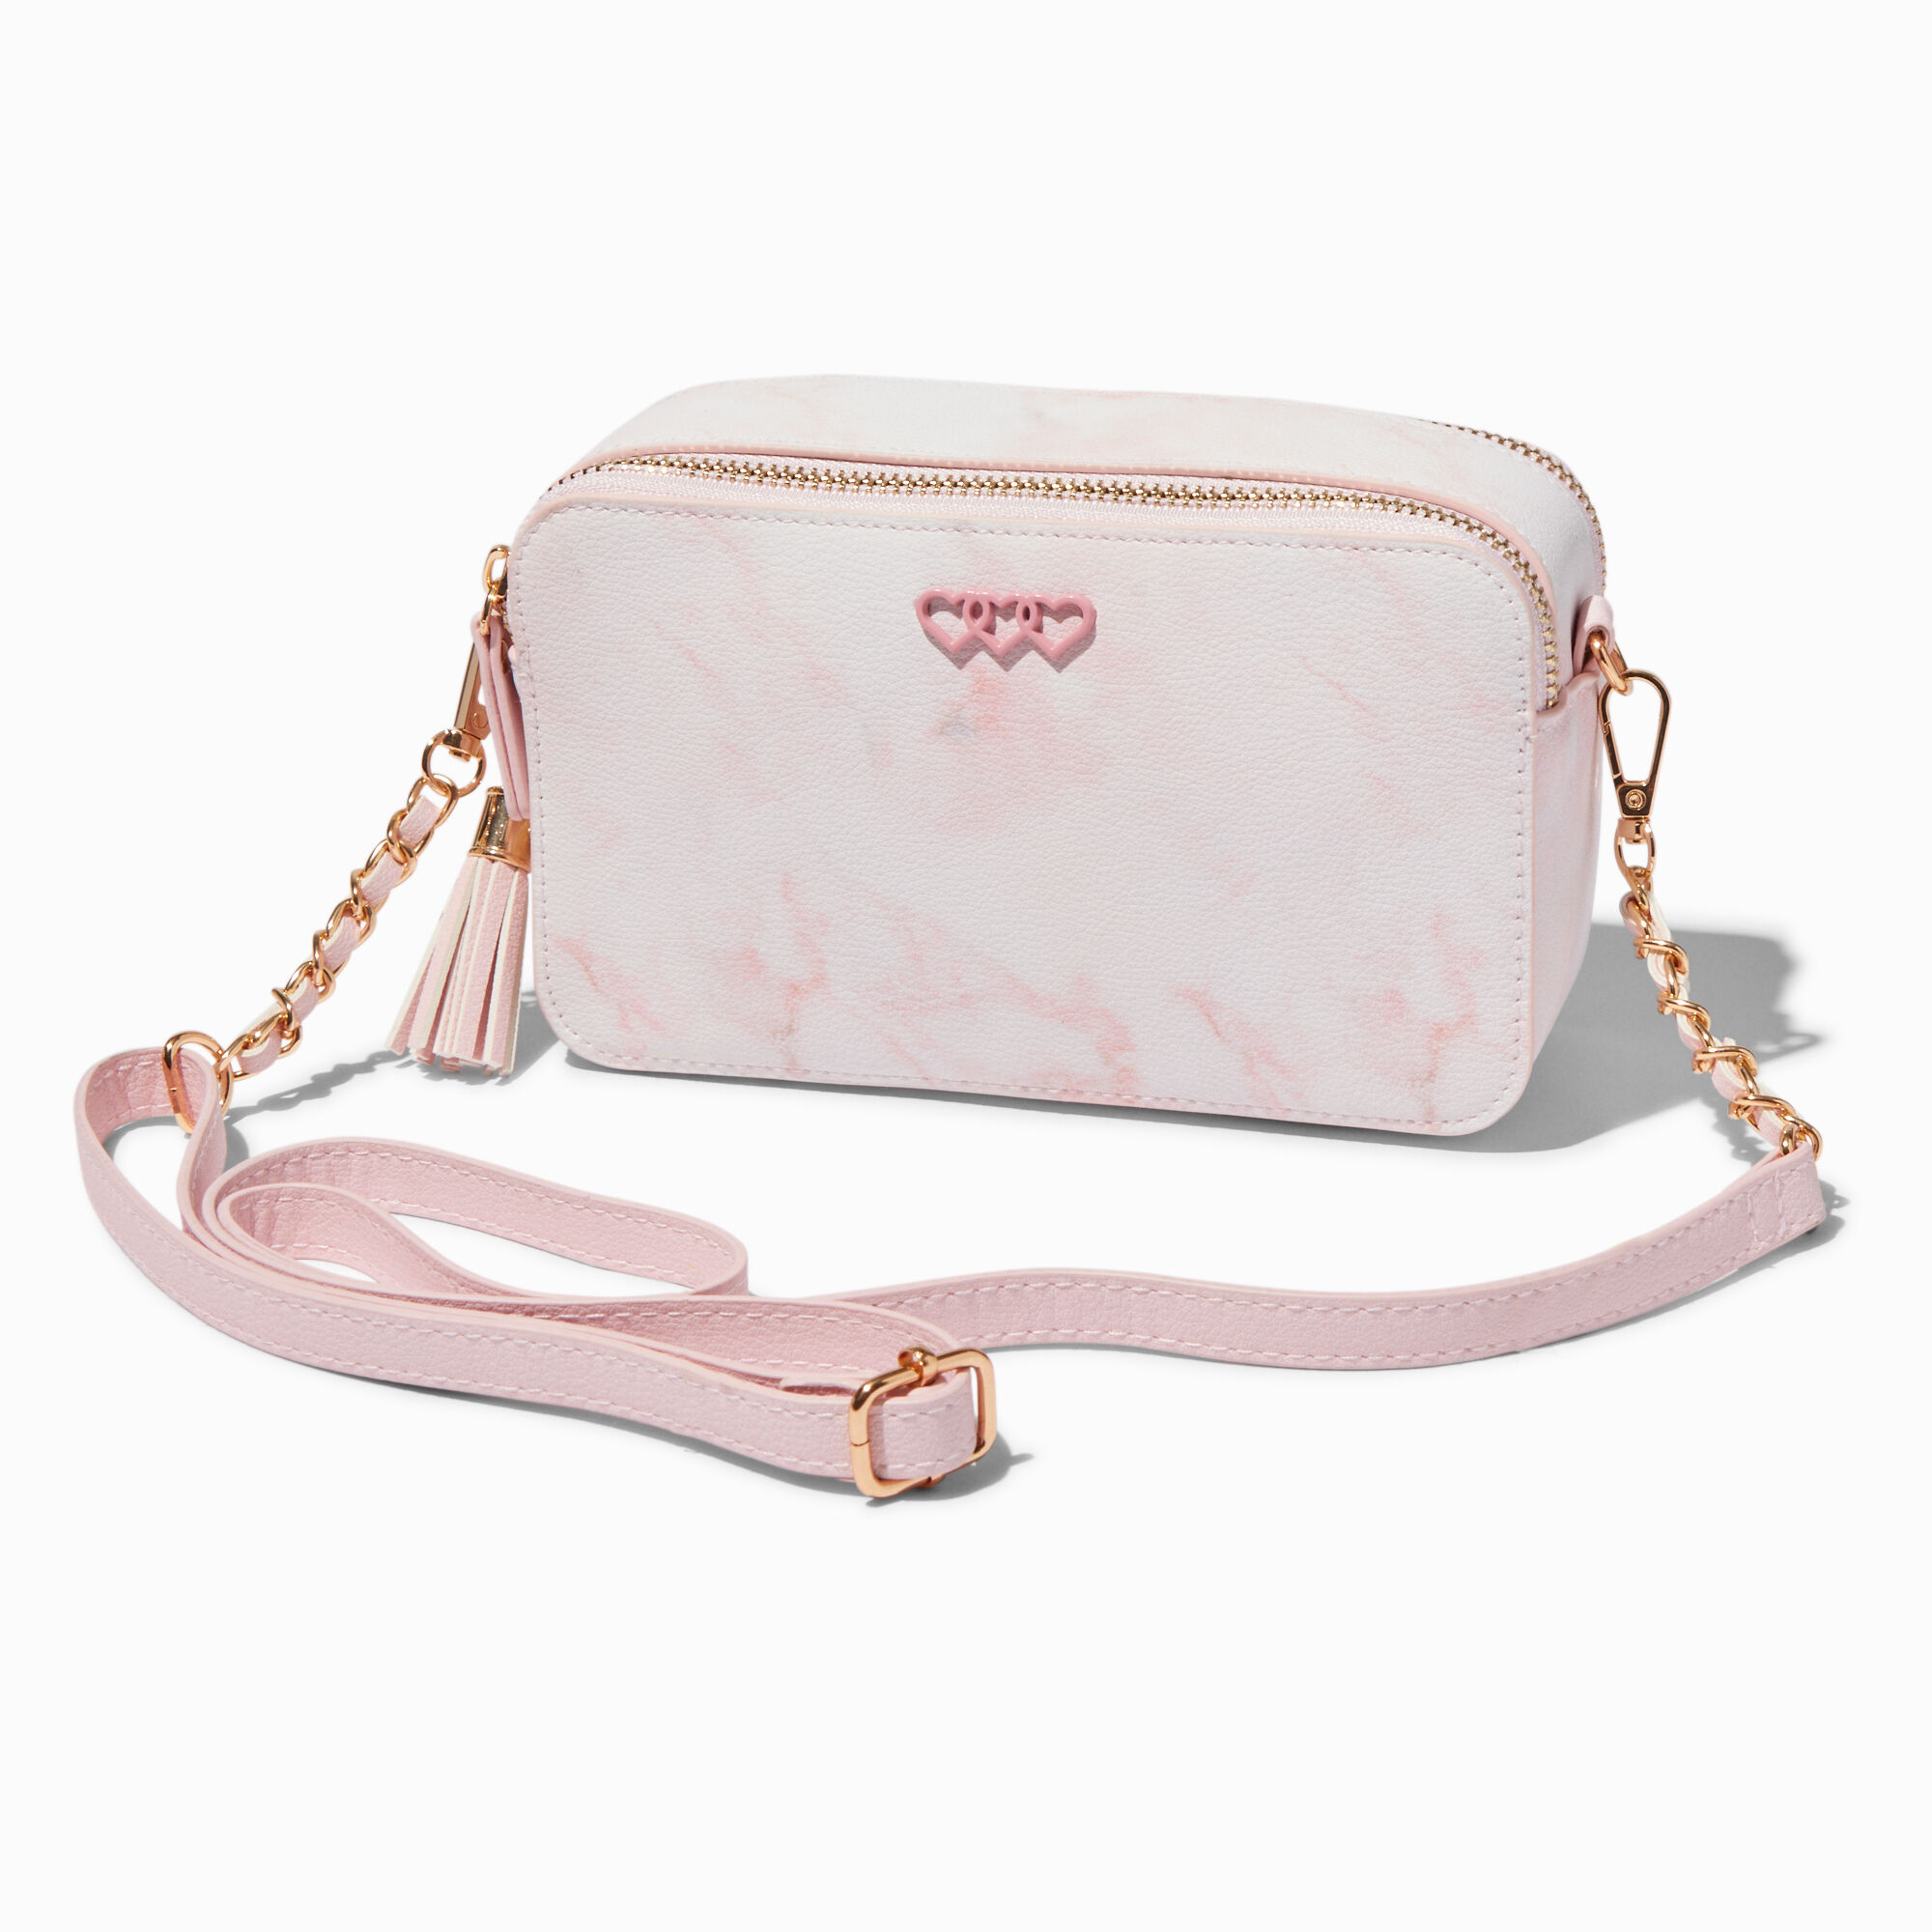 View Claires Marble Print Camera Crossbody Bag Pink information